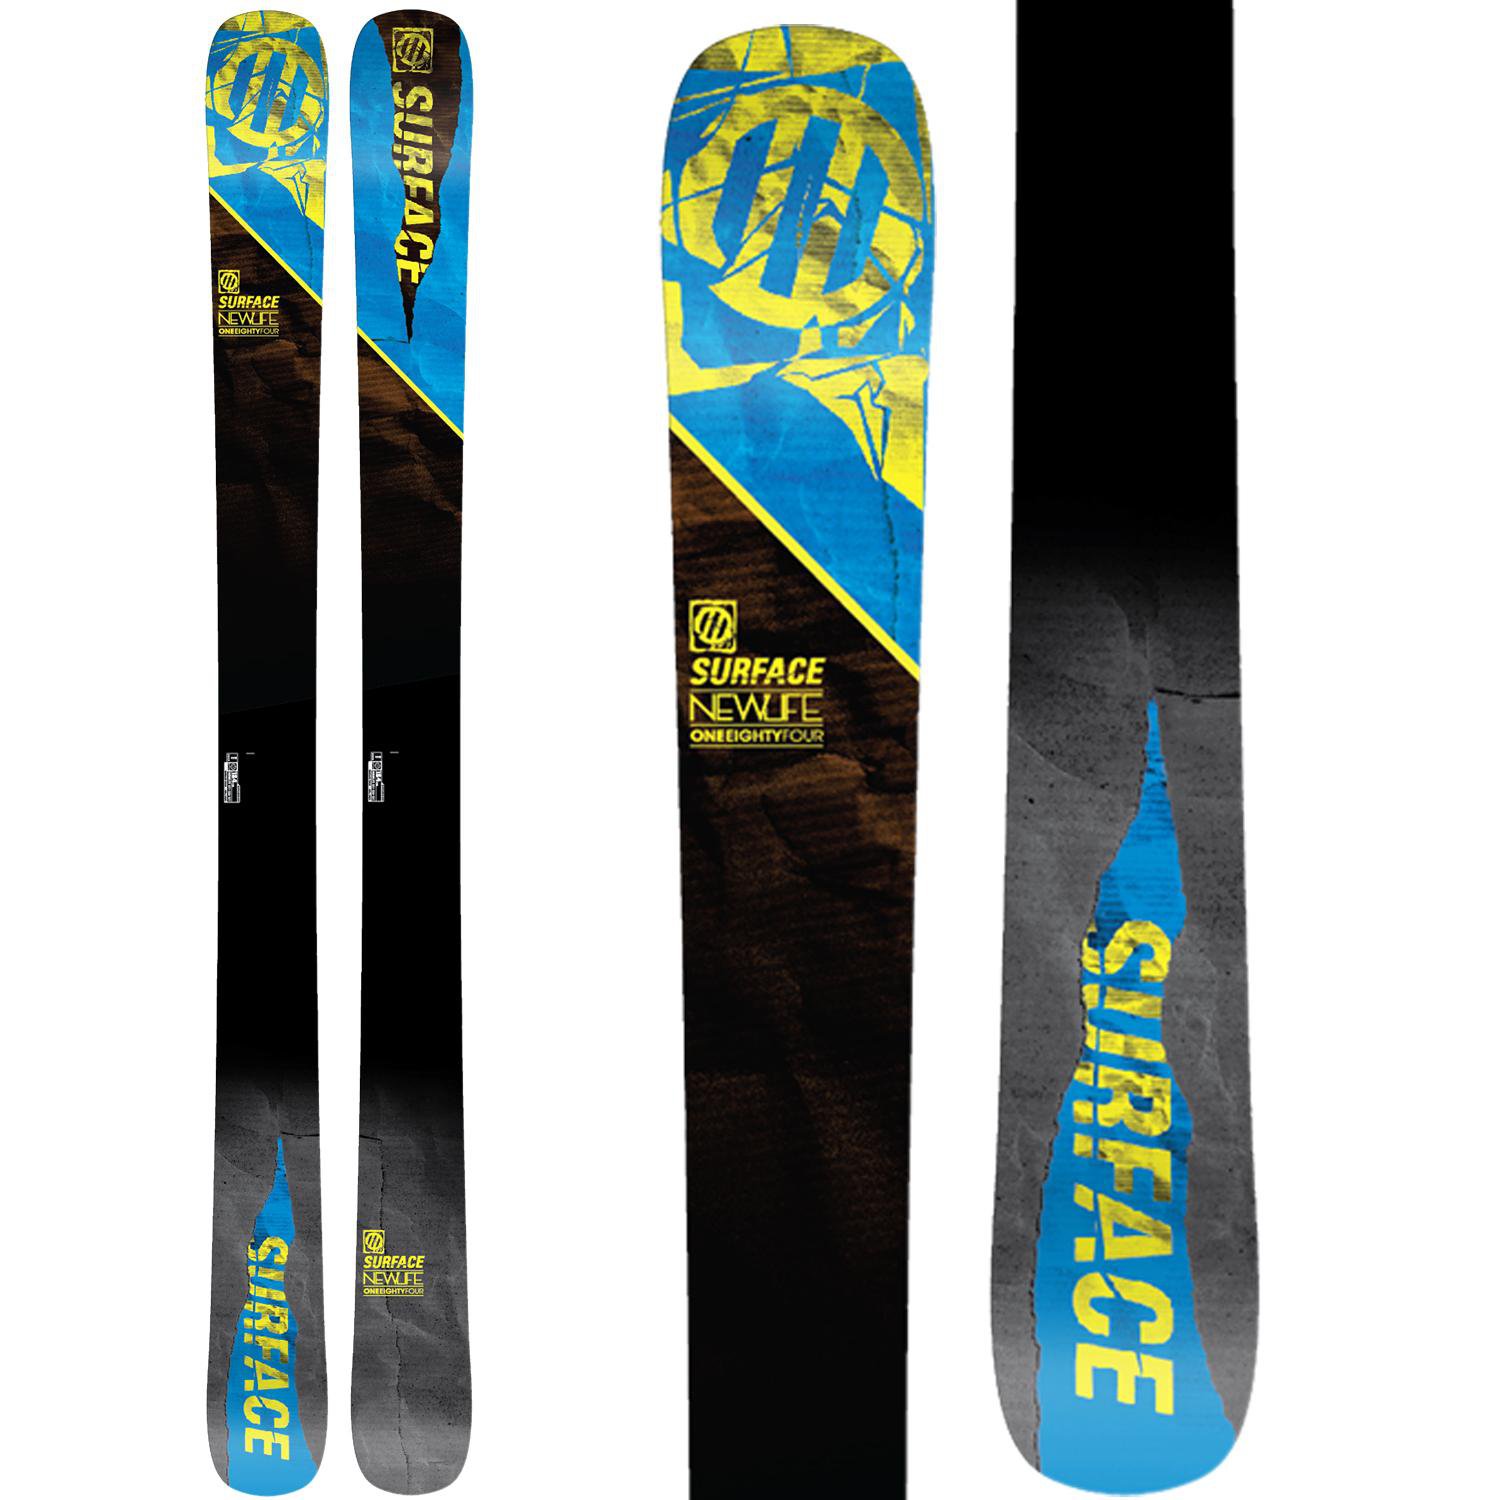 New Skis- Surface New lifes